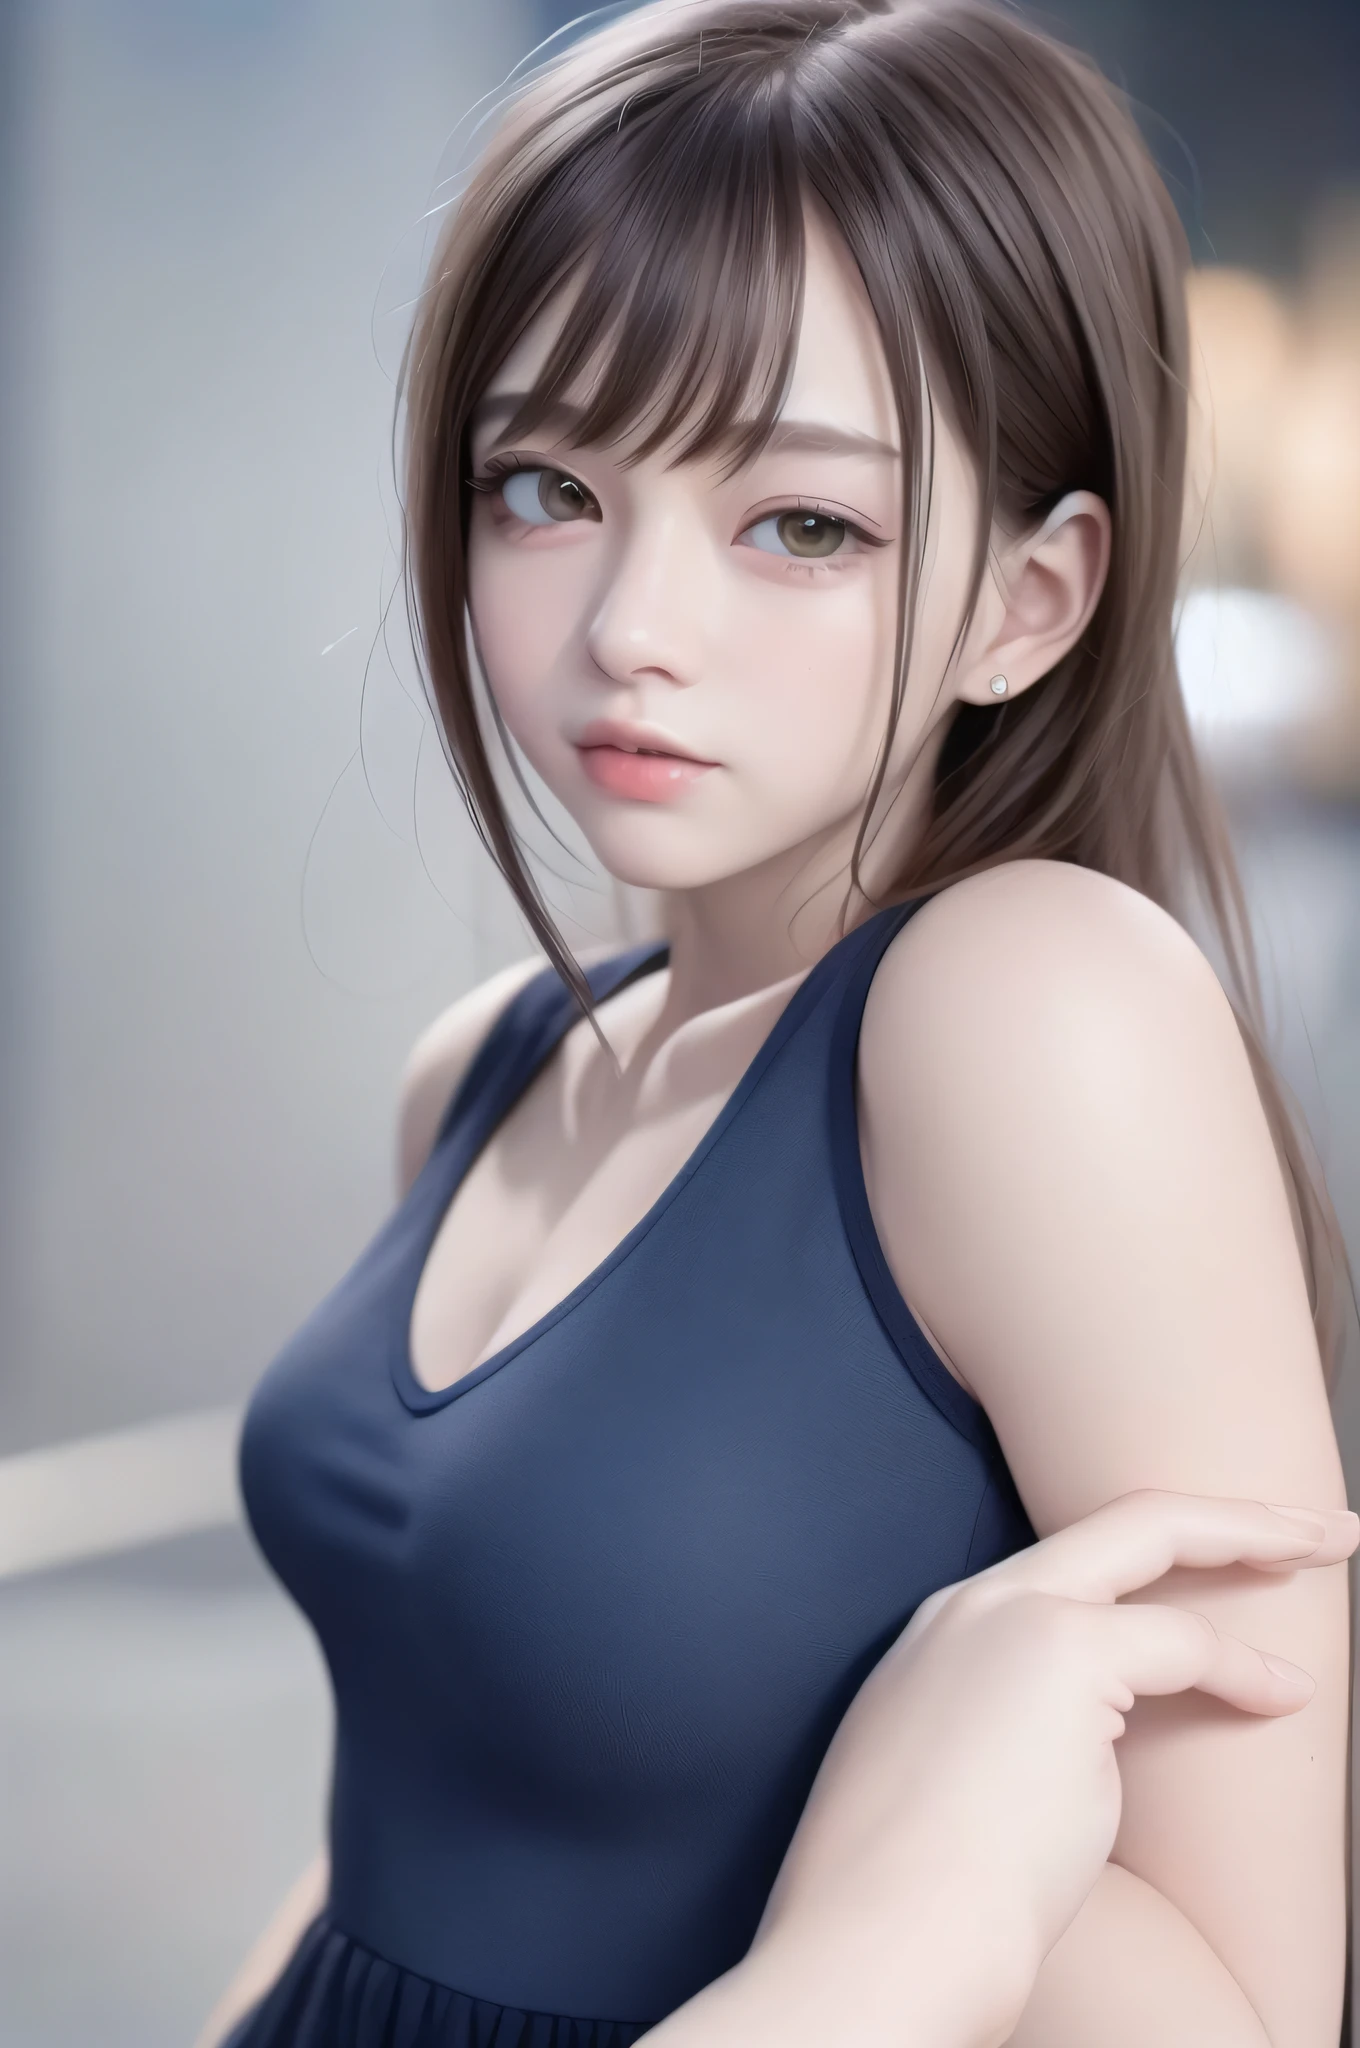 8 head body, bust up, upper body, anime girl with short hair and blue dress, posing for photo, photorealistic anime girl rendering, realistic anime 3d style, smooth anime CG art, [4k photorealism]!, photorealistic anime, soft portrait shot 8k, [4k photorealism]!, 8k portrait rendering, anime realism style, 3d anime realistic, cute realistic portrait